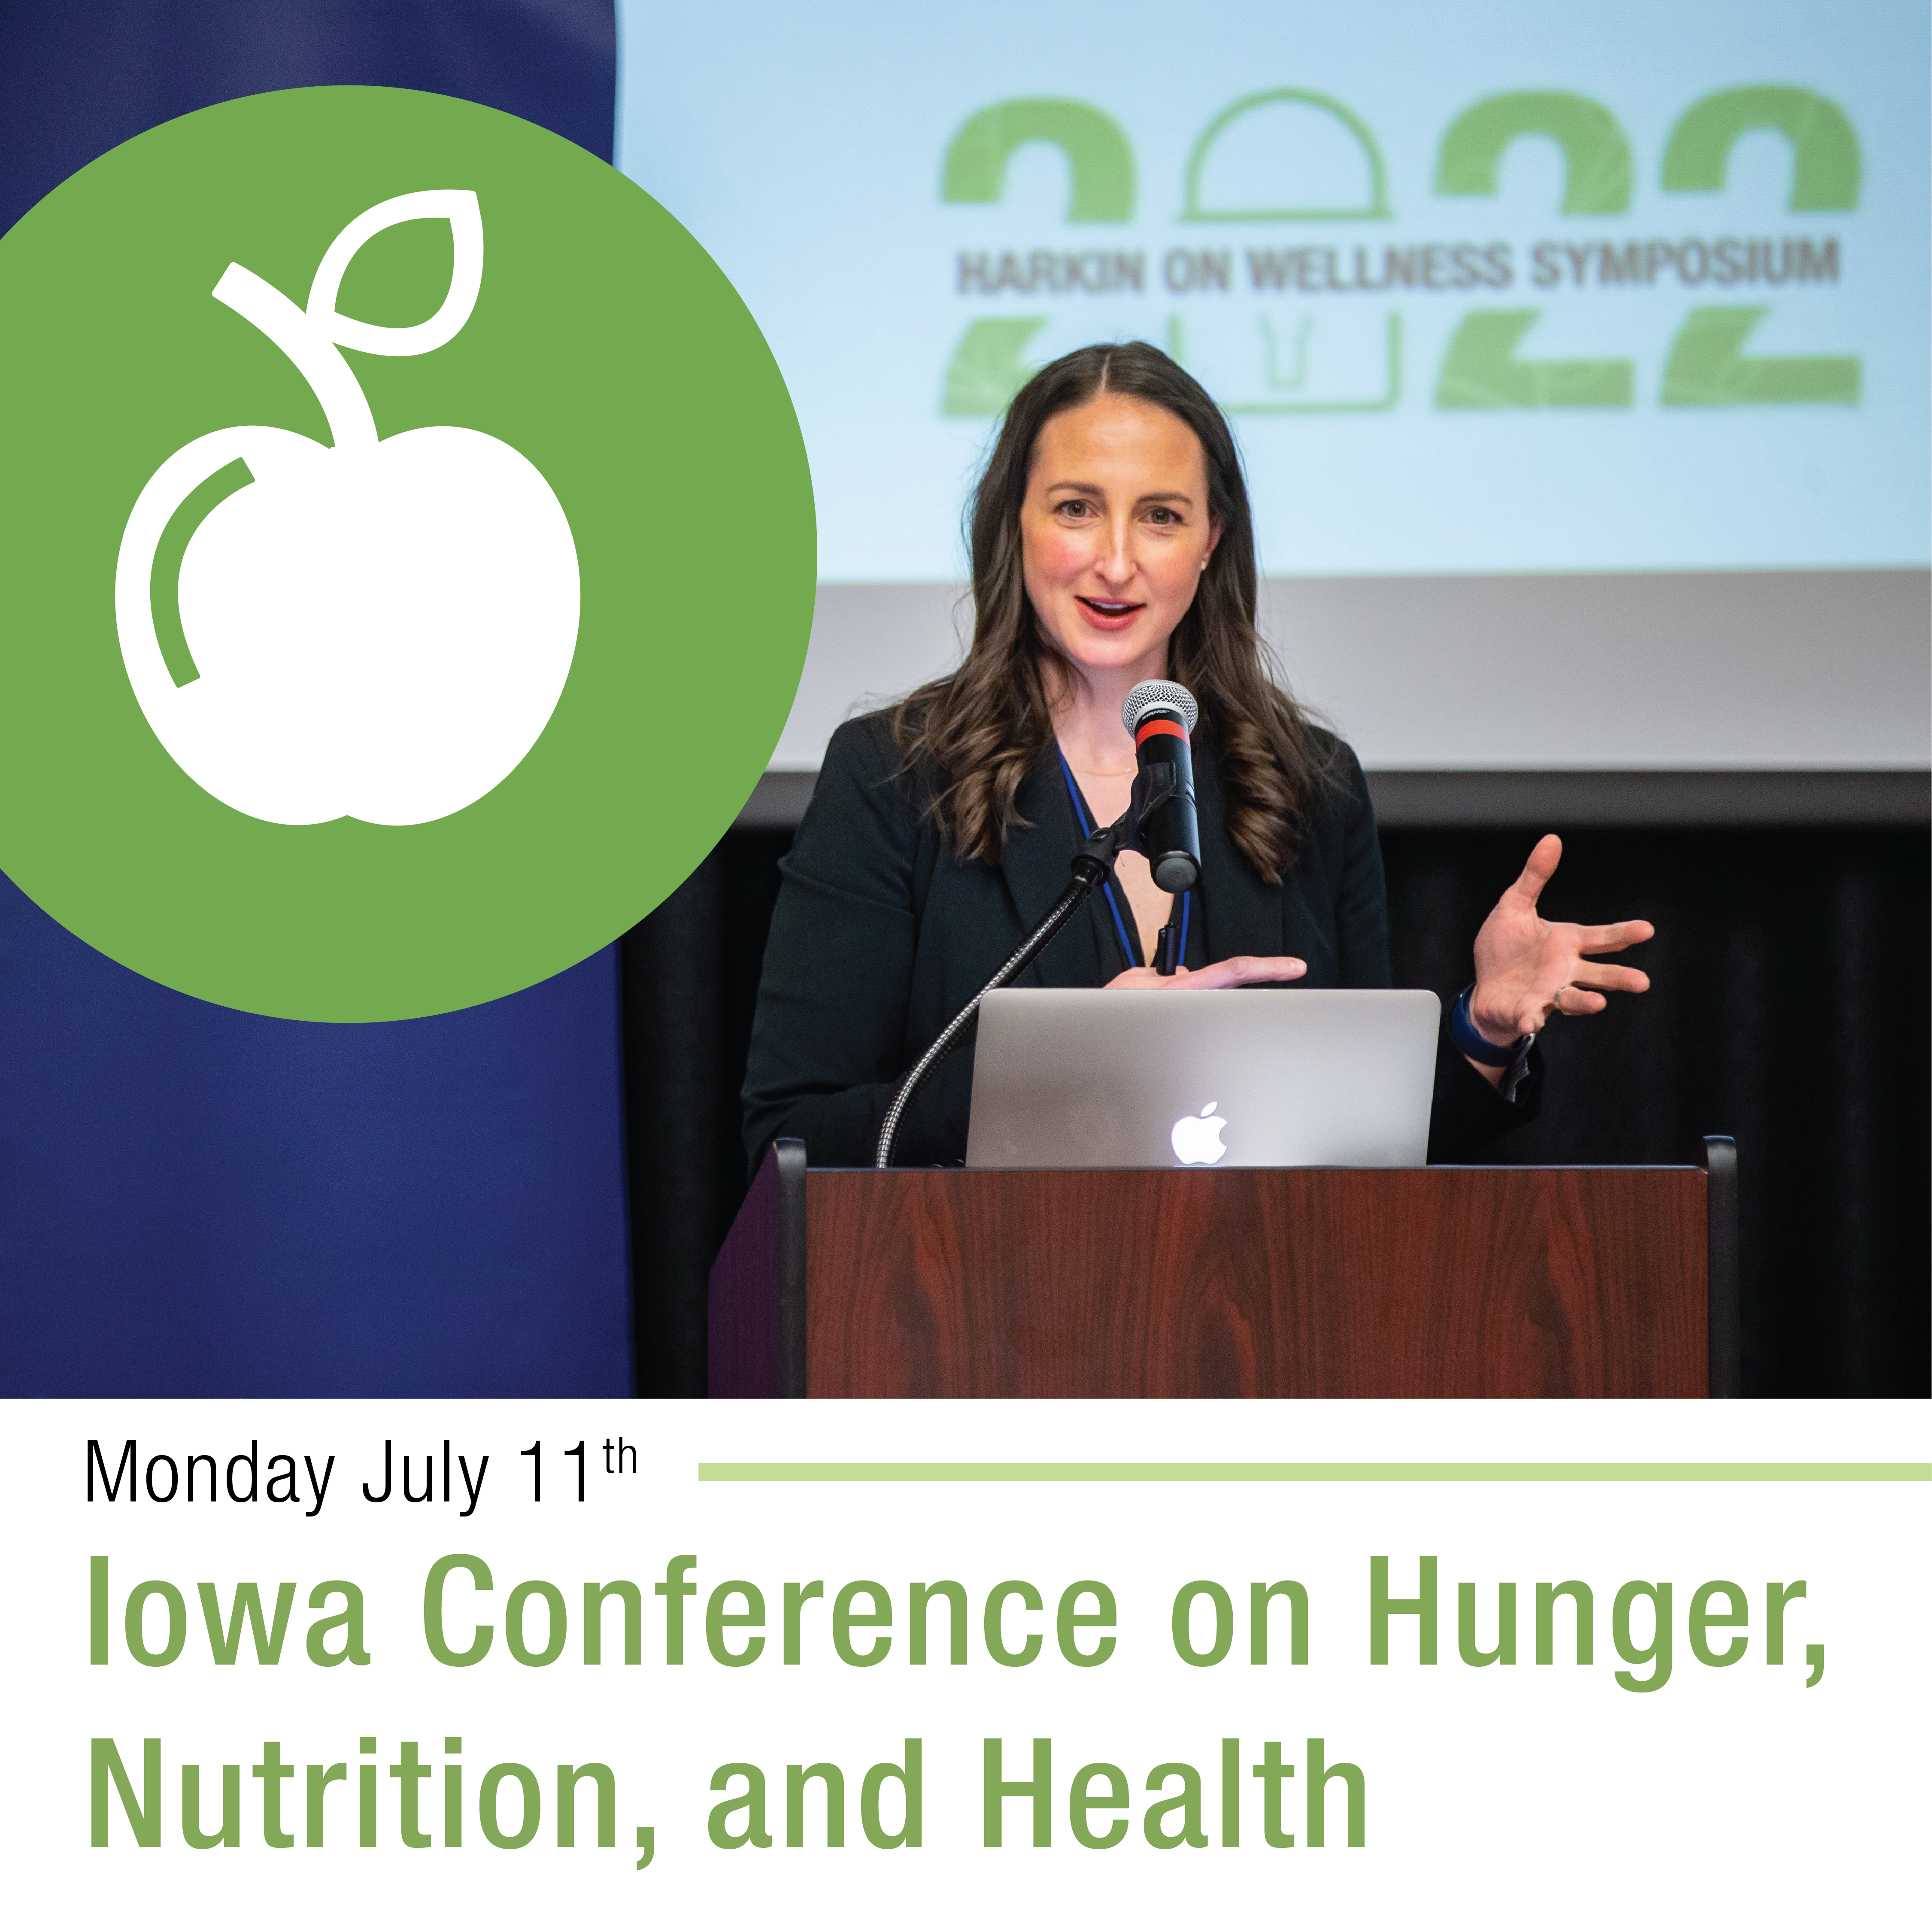 Woman standing at a podium speaking. Text underneath her reads "Monday July 11th. Iowa Conference on Hunger, Nutrition, and Health".